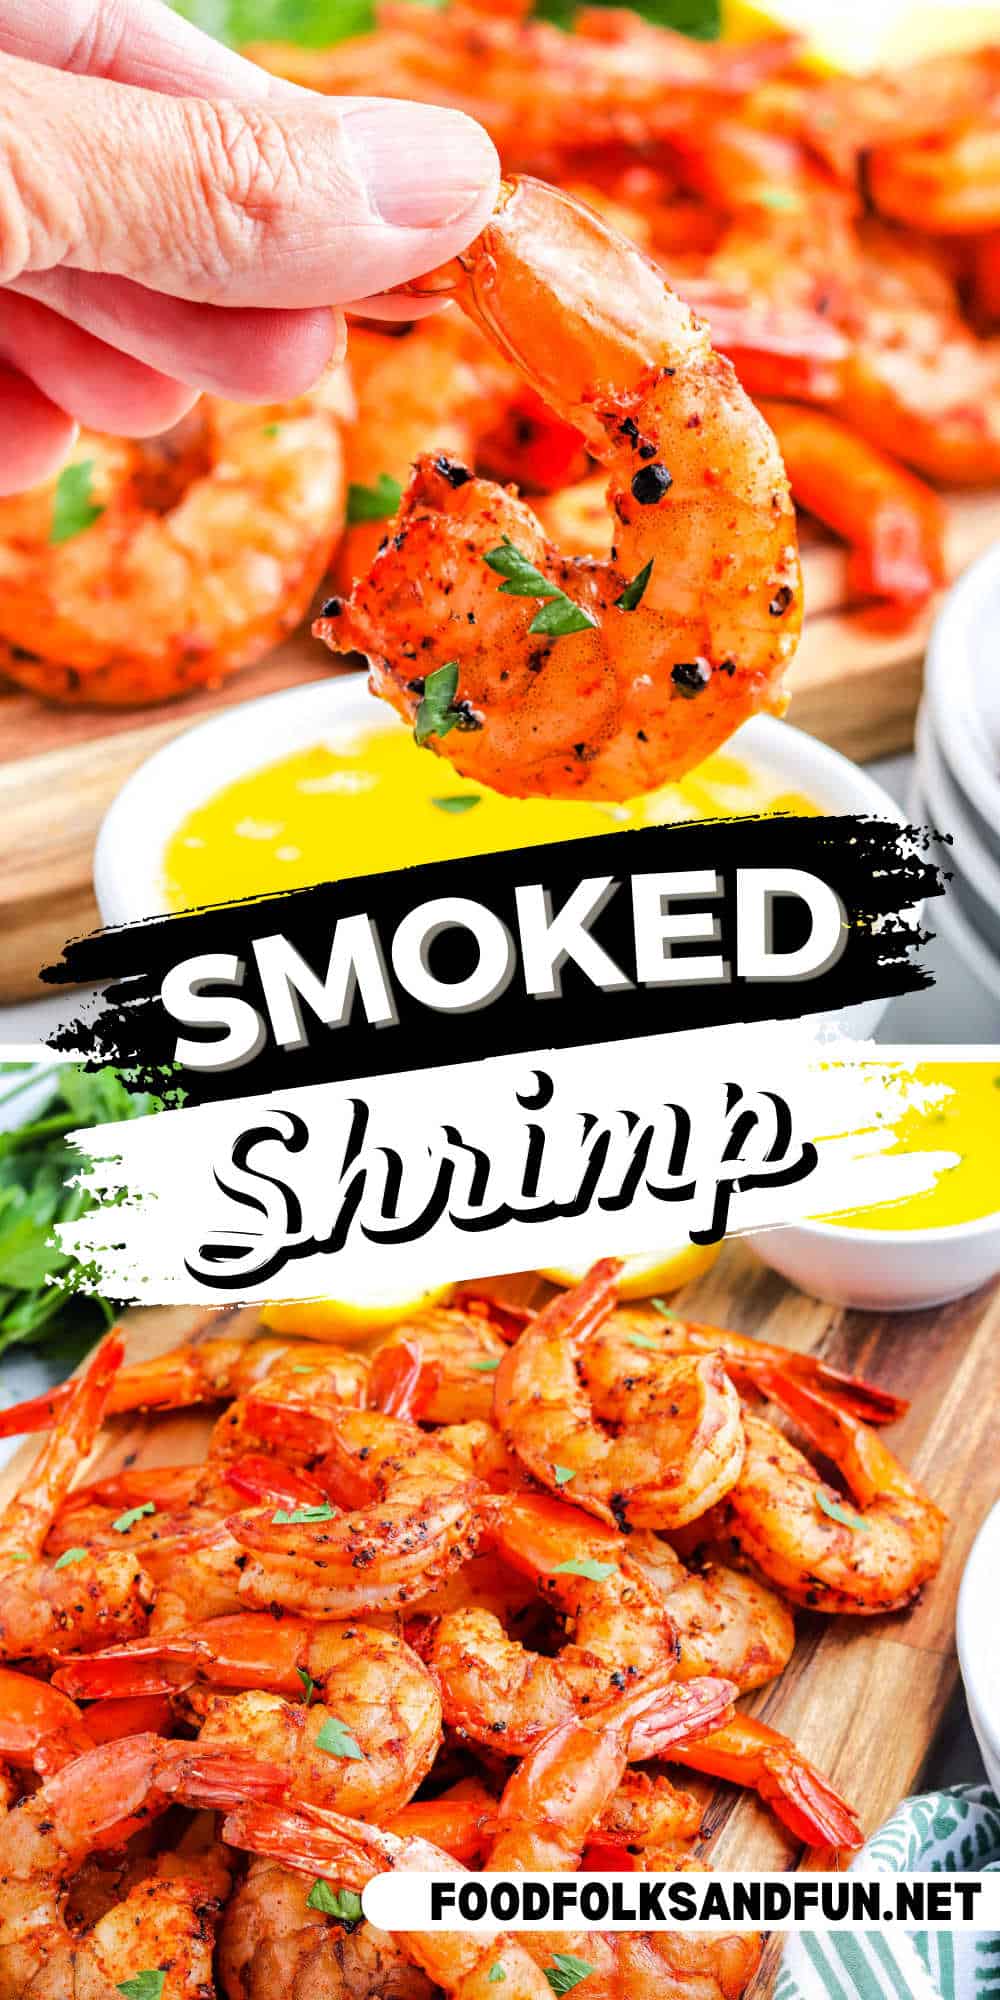 Savor the smoky flavor of perfectly cooked shrimp with my mouthwatering smoked shrimp recipe. This recipe is irresistible and easy to make! via @foodfolksandfun